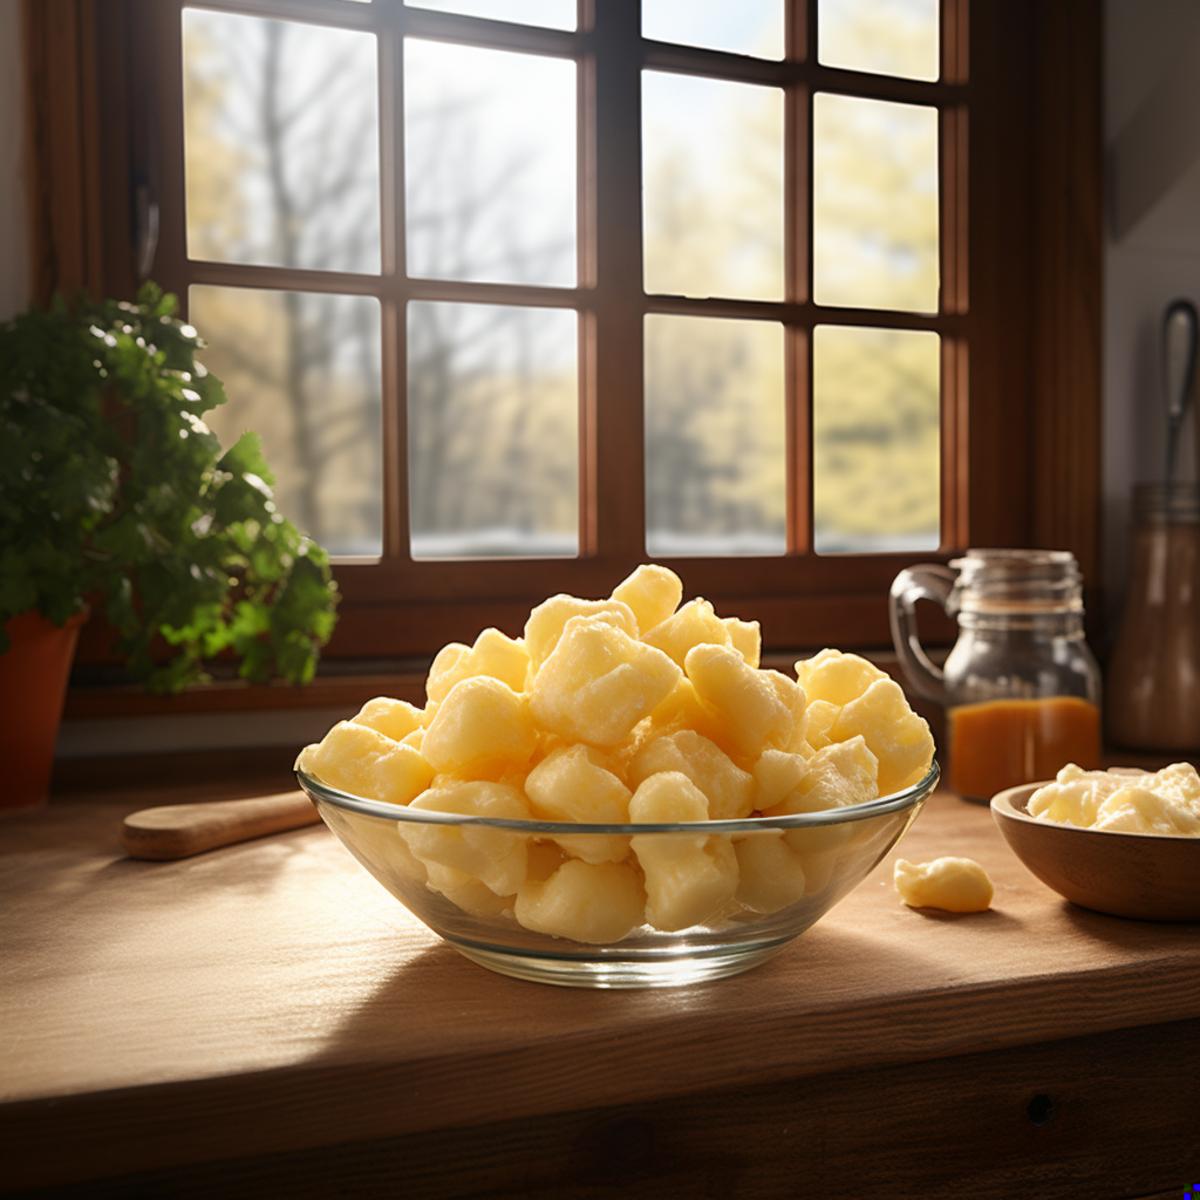 Cheese Curds on a kitchen counter